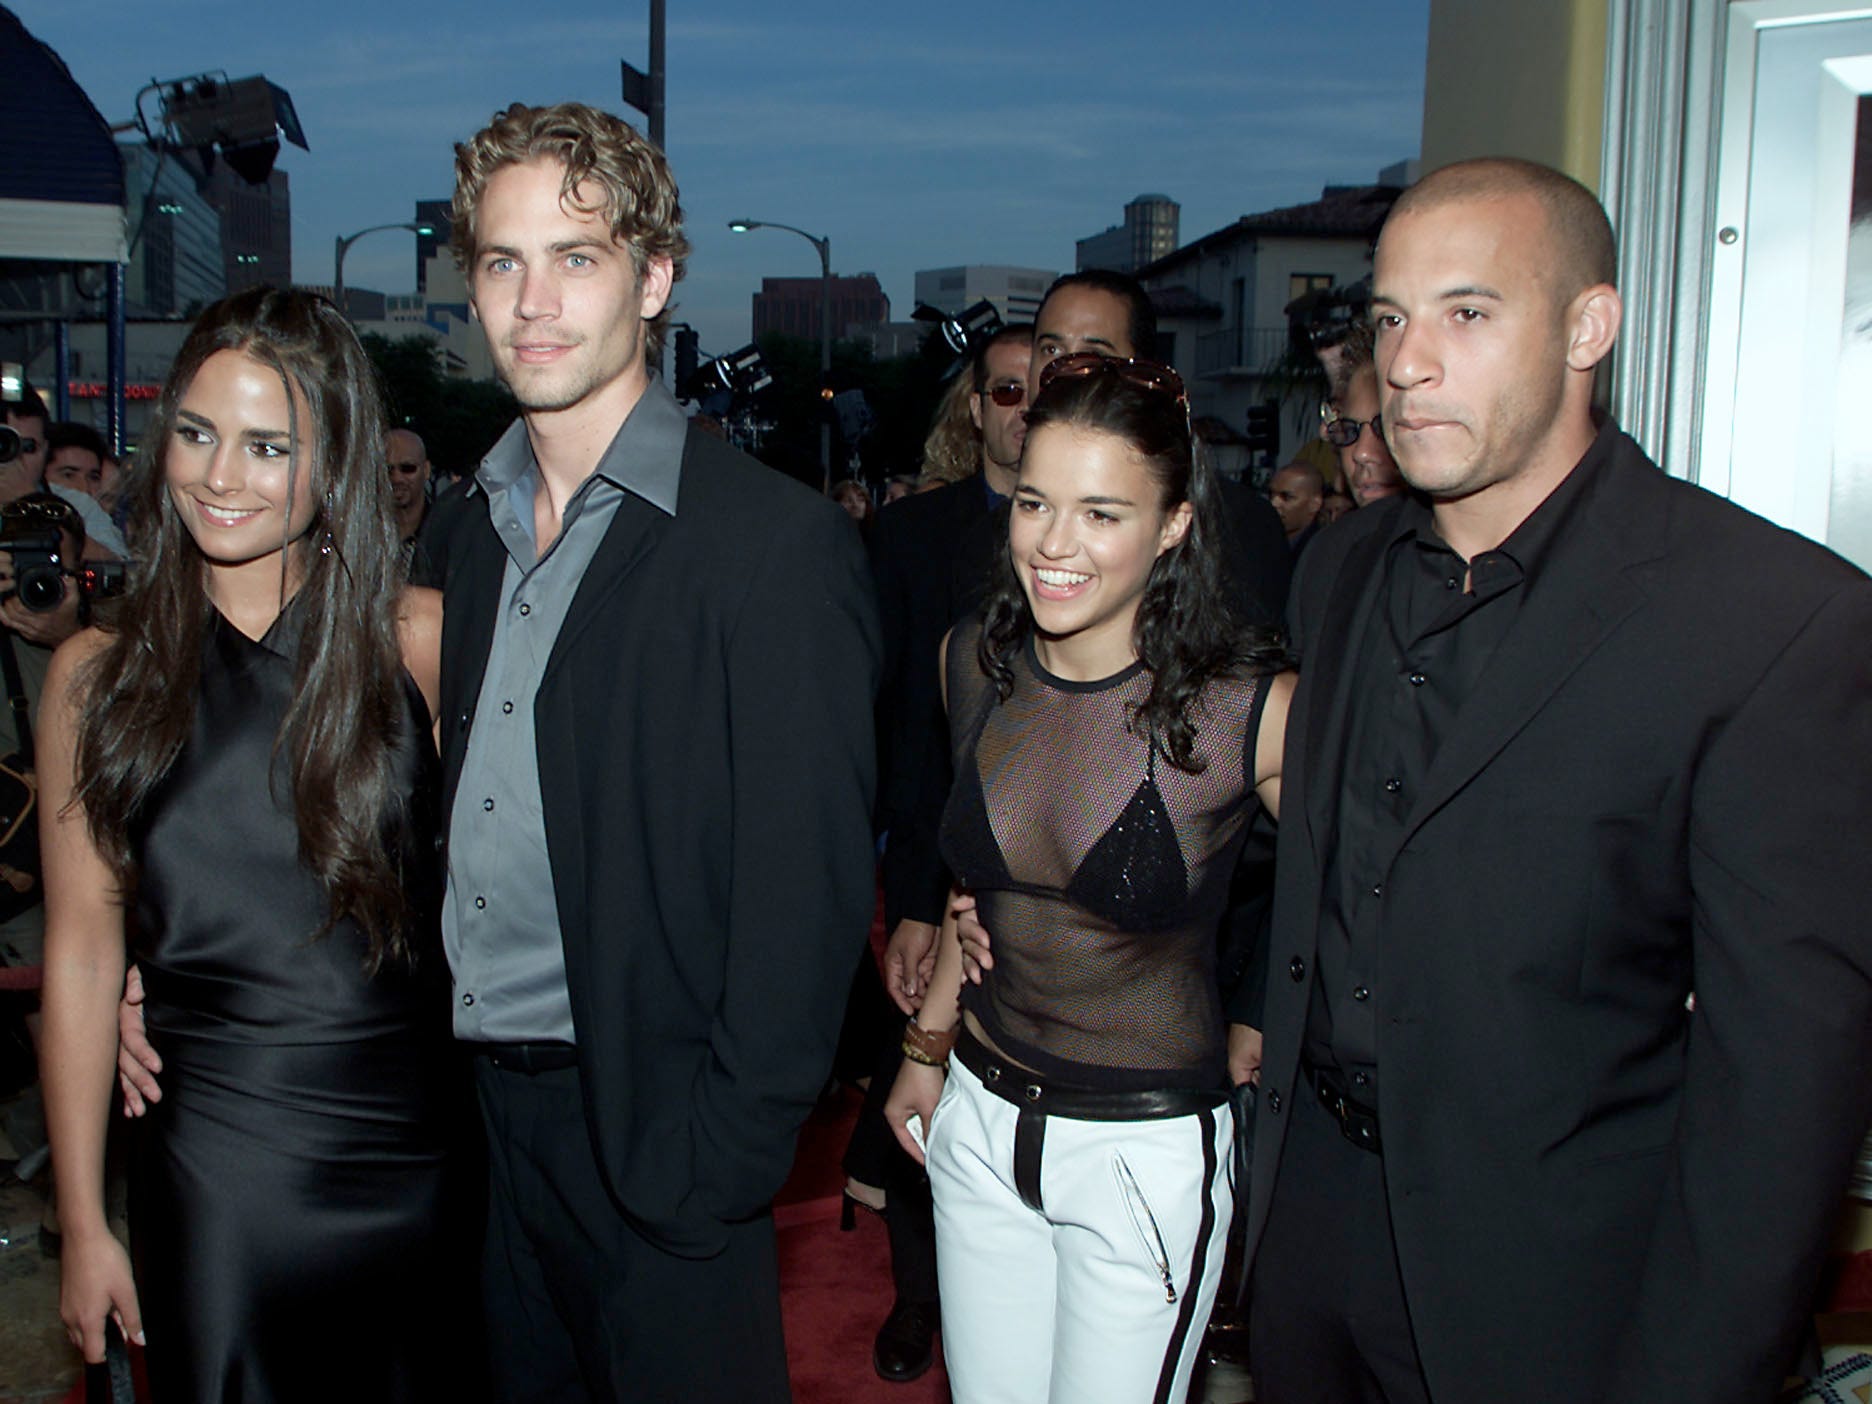 Jordana Brewster, Paul Walker, Michelle Rodriguez, and Vin Diesel attend "The Fast and the Furious" premiere at Mann Village Theatre in Los Angeles, California.